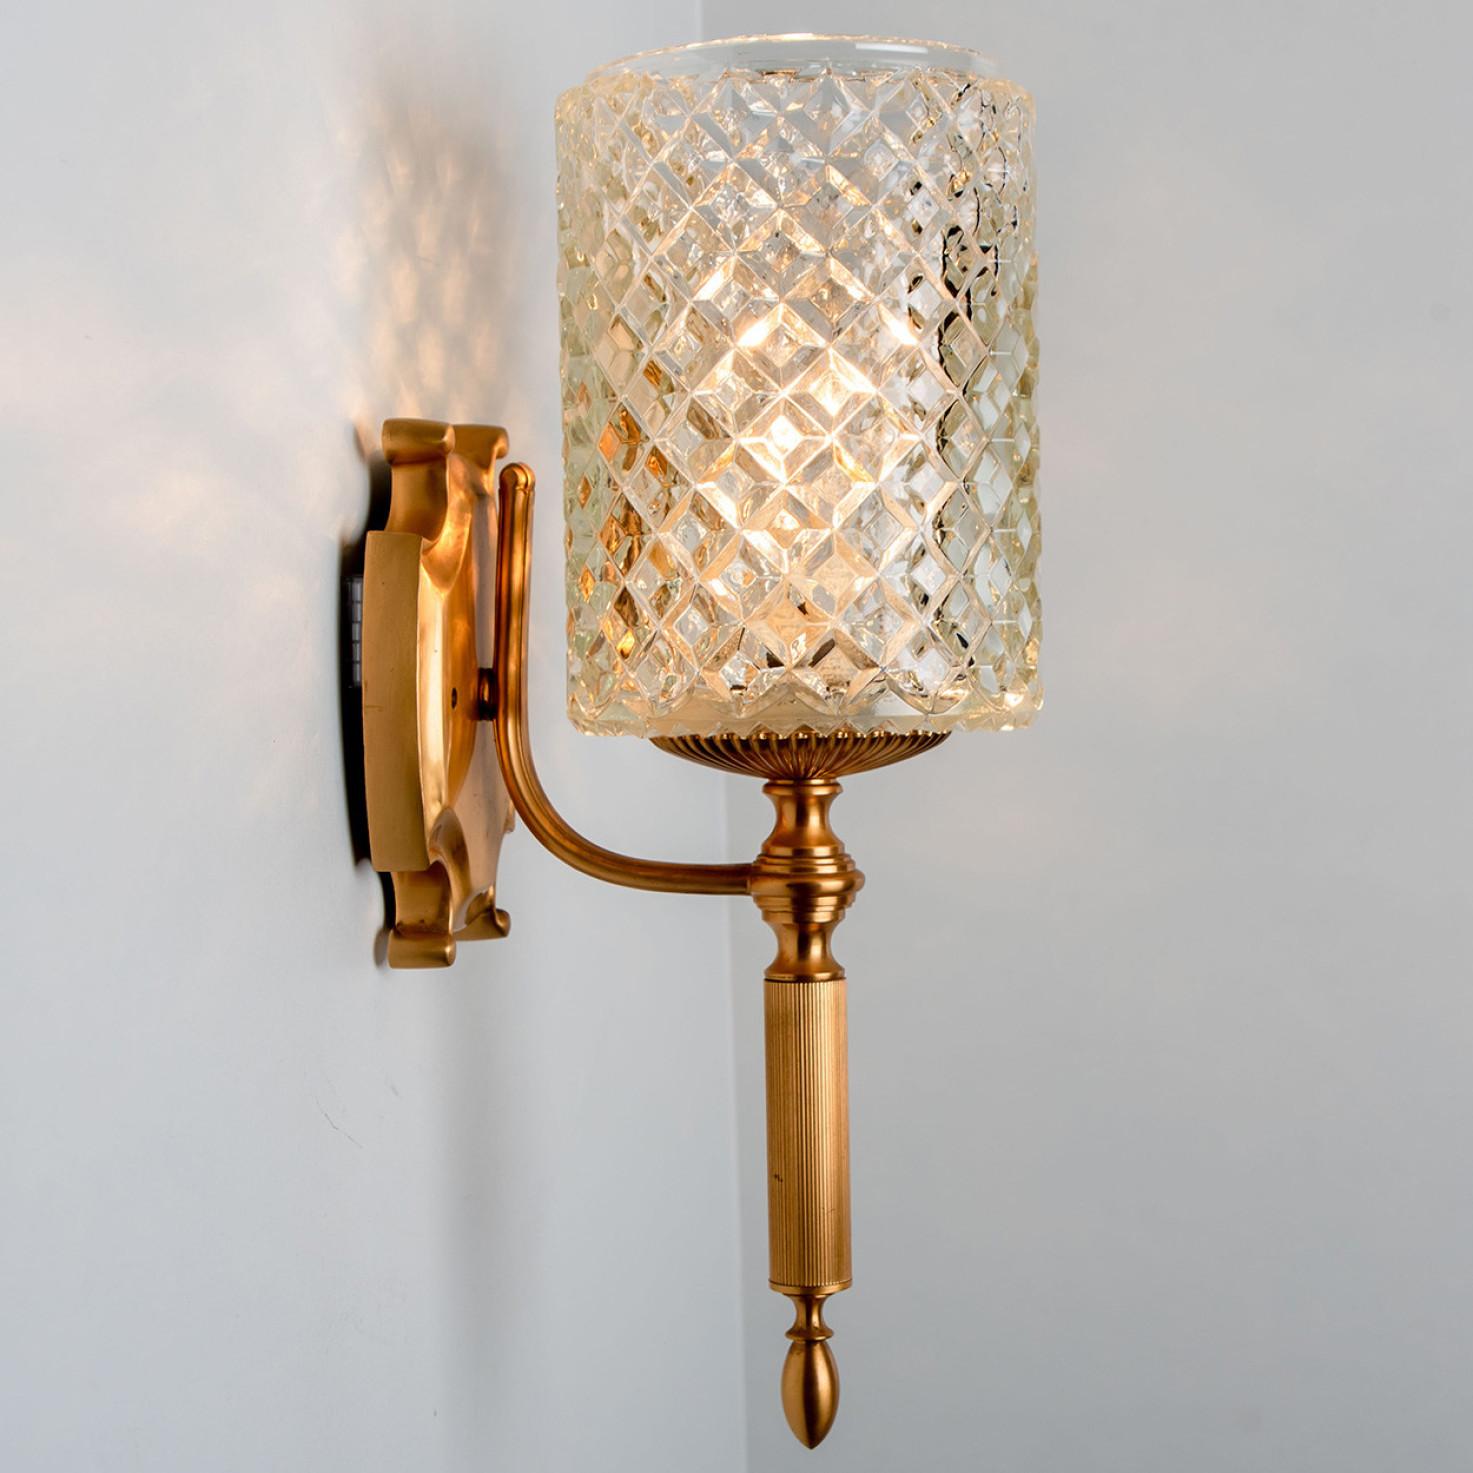 Textured Glass and Brass Wall Lights, Germany, 1960s For Sale 2